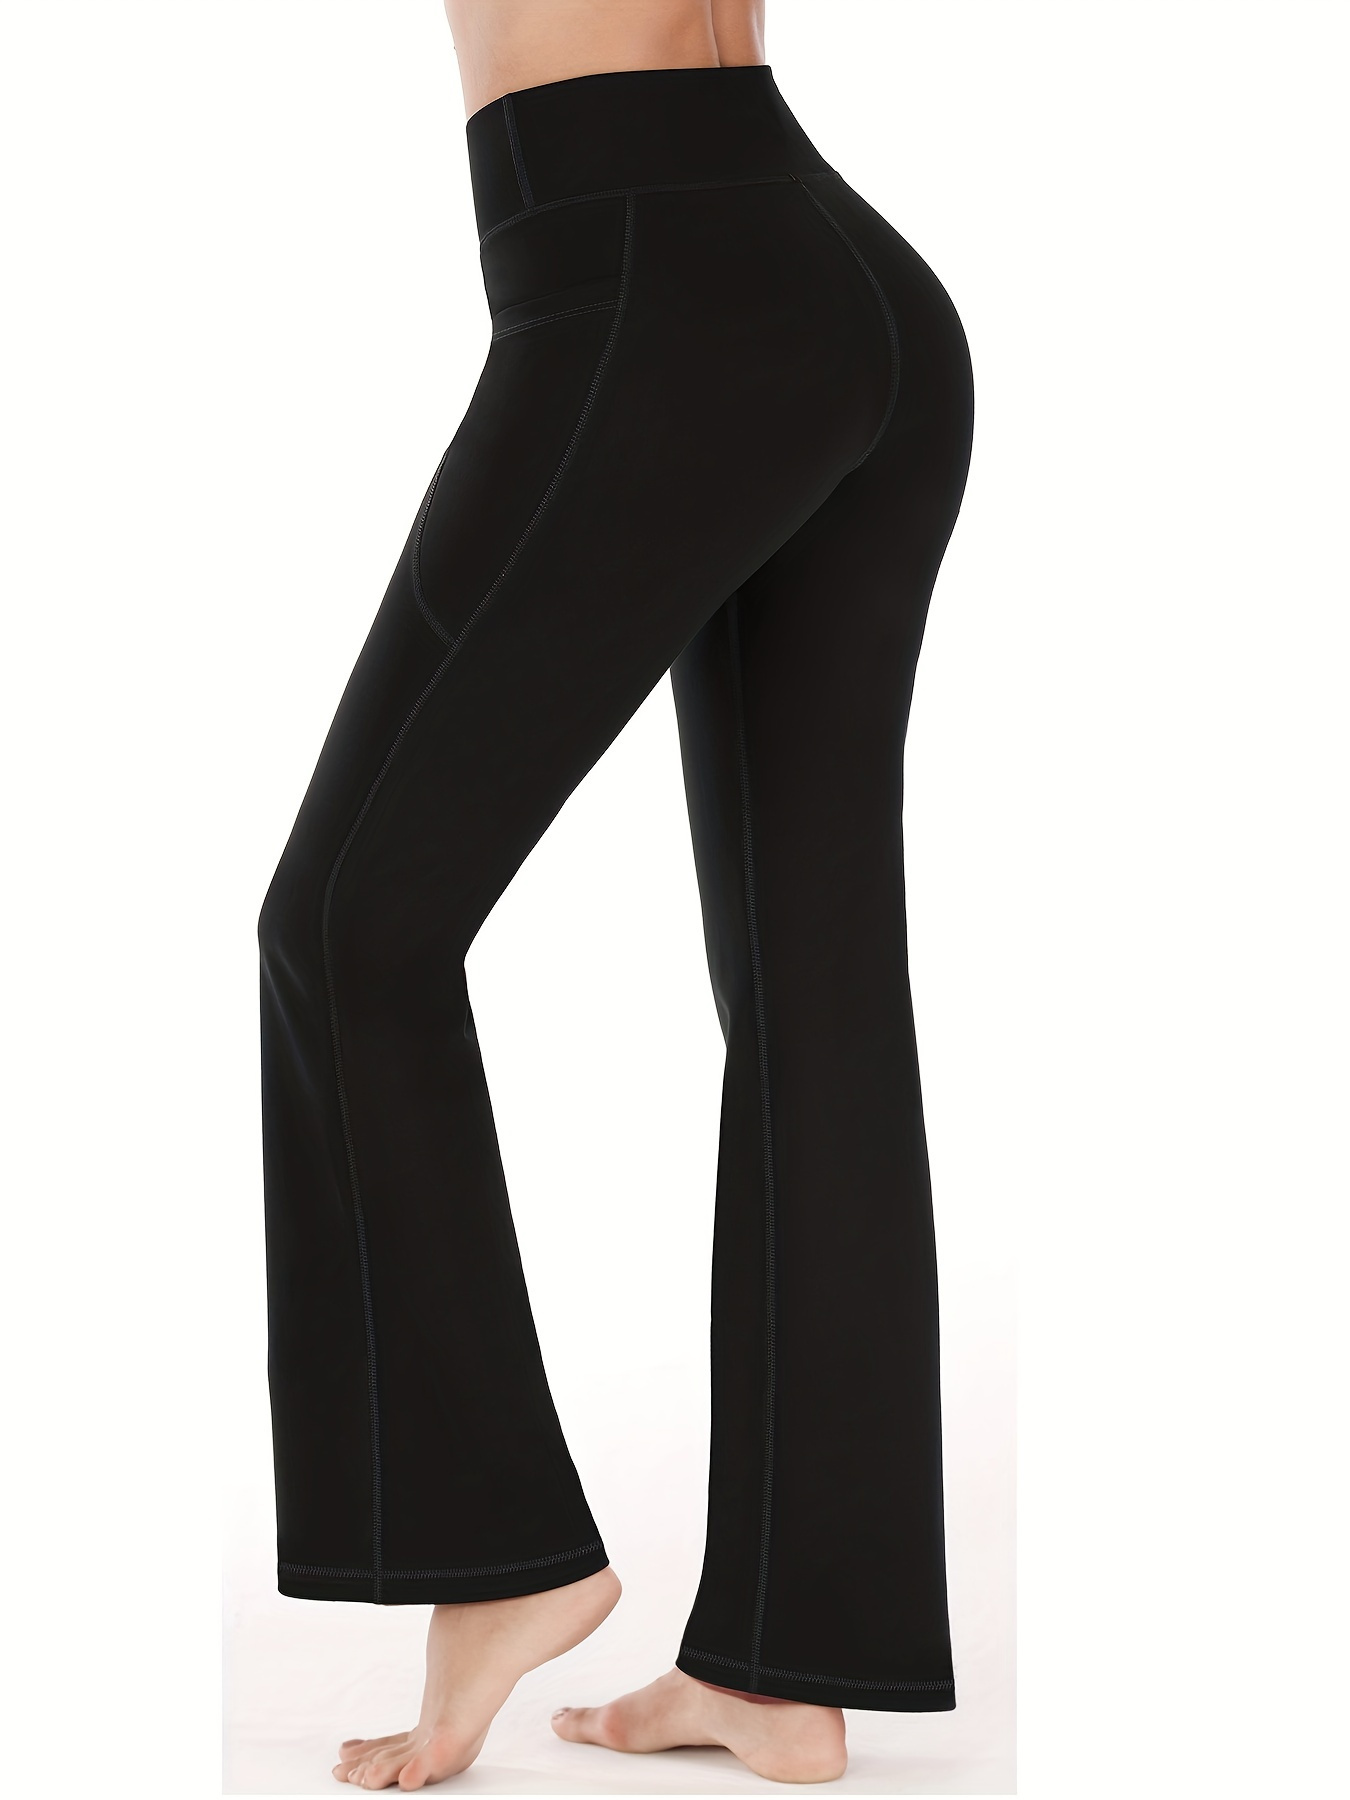 So much more flattering than leggings!'  shoppers are obsessed by the  leg-slimming and lengthening effects of these ultra soft flared yoga pants  reduced by 25%